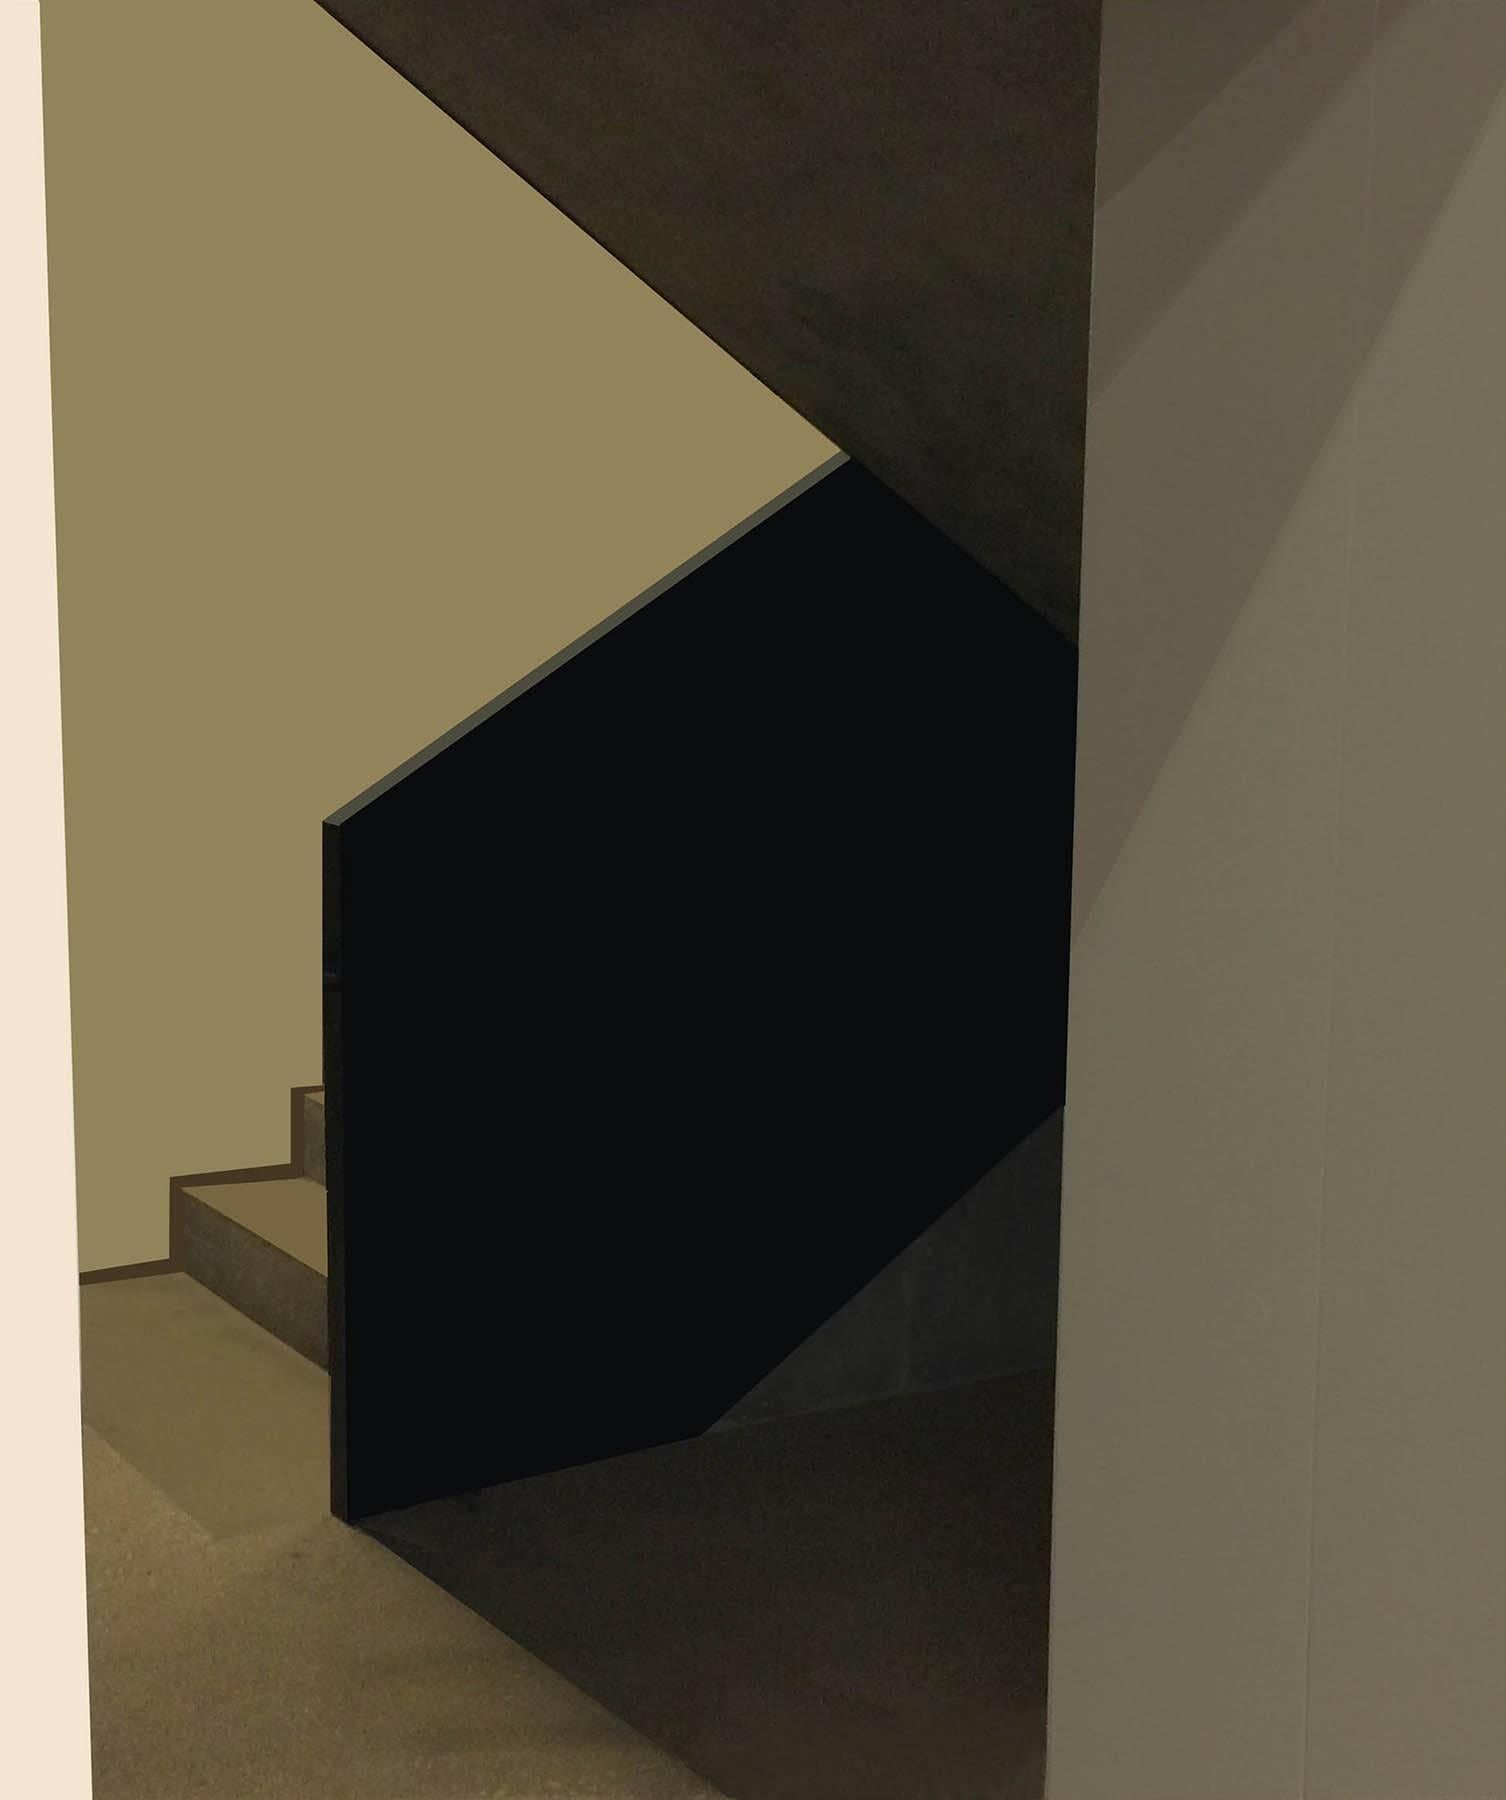 Stephanie Blumenthal Abstract Photograph - Green Stairs: Modern Abstract Inkjet Print of Minimalist Interior in Black Frame